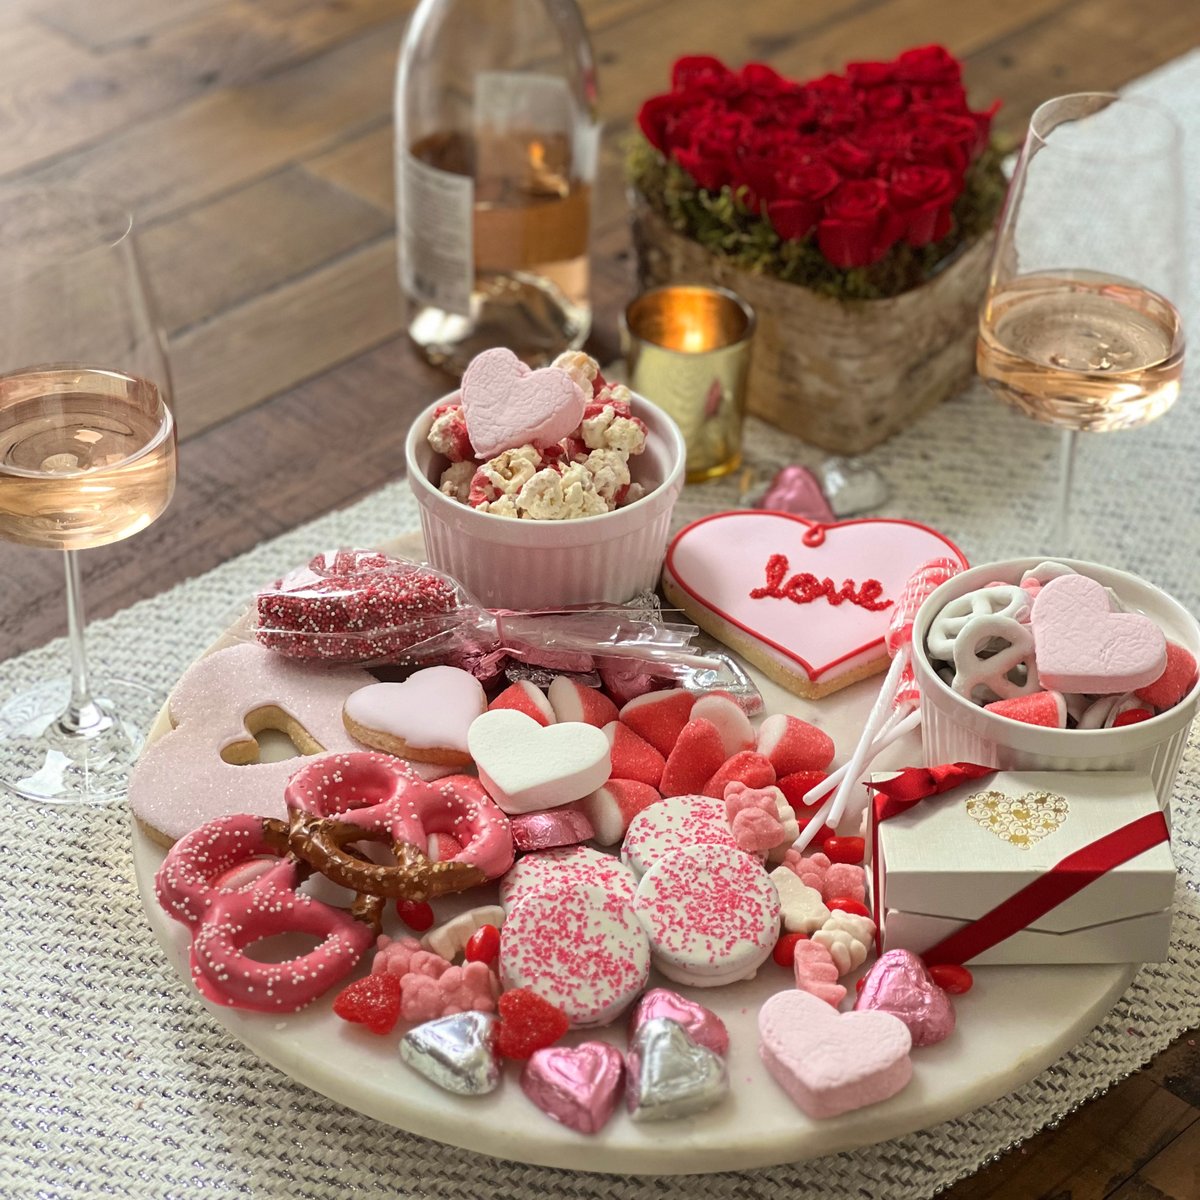 Our yummiest Valentine treats to swoon over. 💓
#oliveandcocoa #valentinesday #giftsforvalentinesday #valentinesdaysweets #valentinesdaysweets #valentine #gifts #giftbasket #giftcrate #foodgift #gourmetsweets